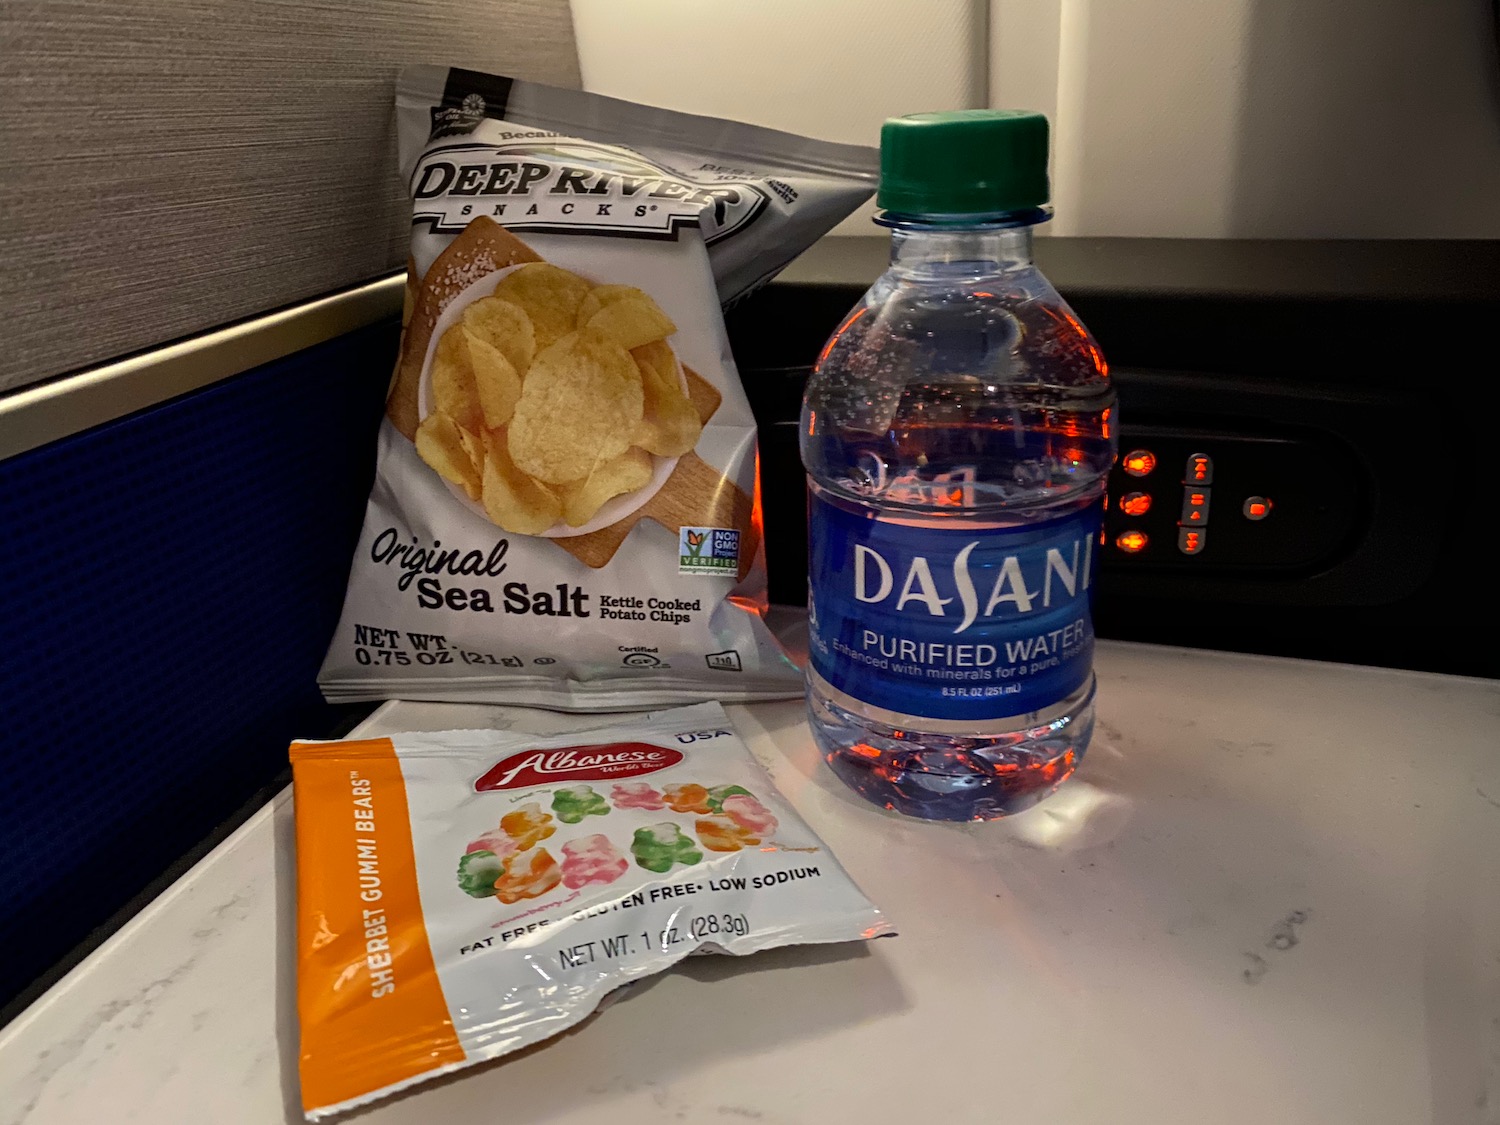 a bottle of water and bags of chips